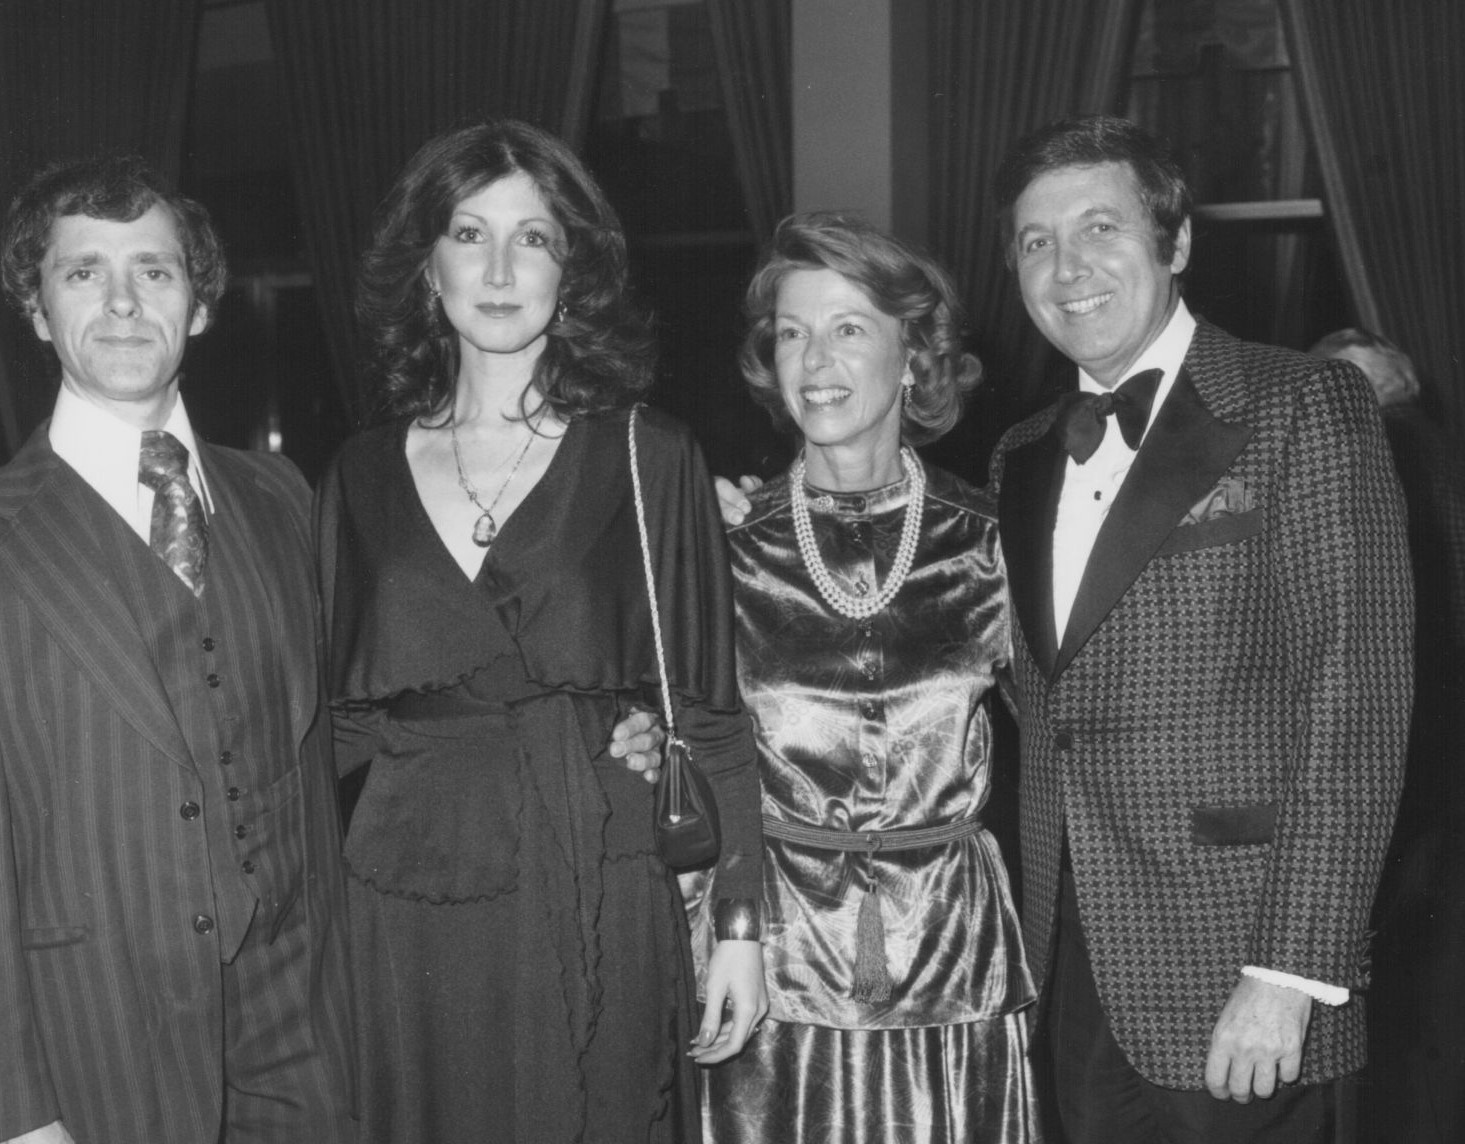 The legendary game show host, Monty hall with his wife and daughter, Joanna Gleason.